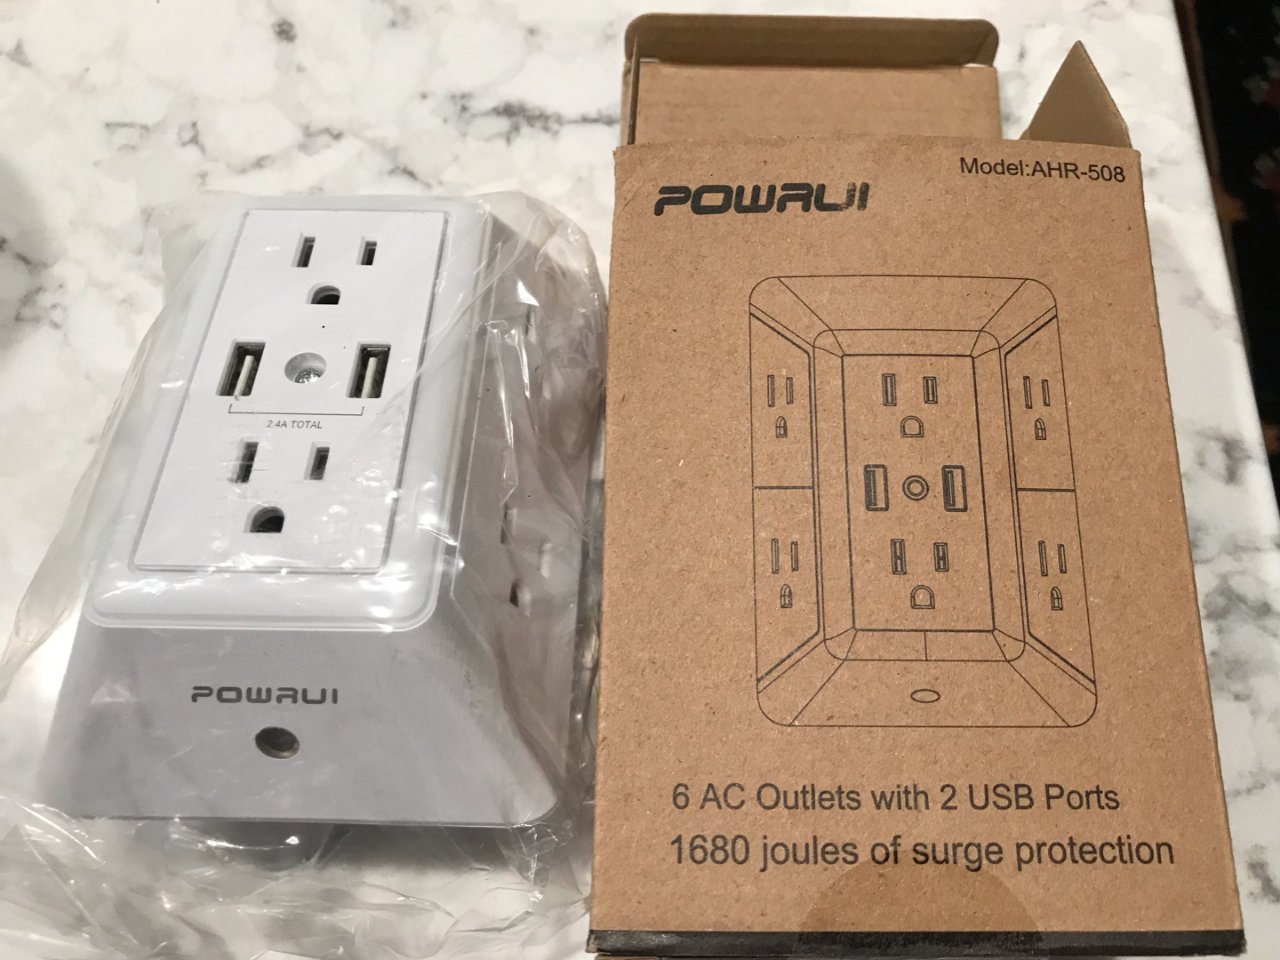 USB Wall Charger, Surge Protector, POWRUI 6-Outlet Extender with 2 USB Charging Ports (2.4A Total) and Night Light, 3-Sided Power Strip with Adapter Spaced Outlets - White，ETL Listed: Electronics